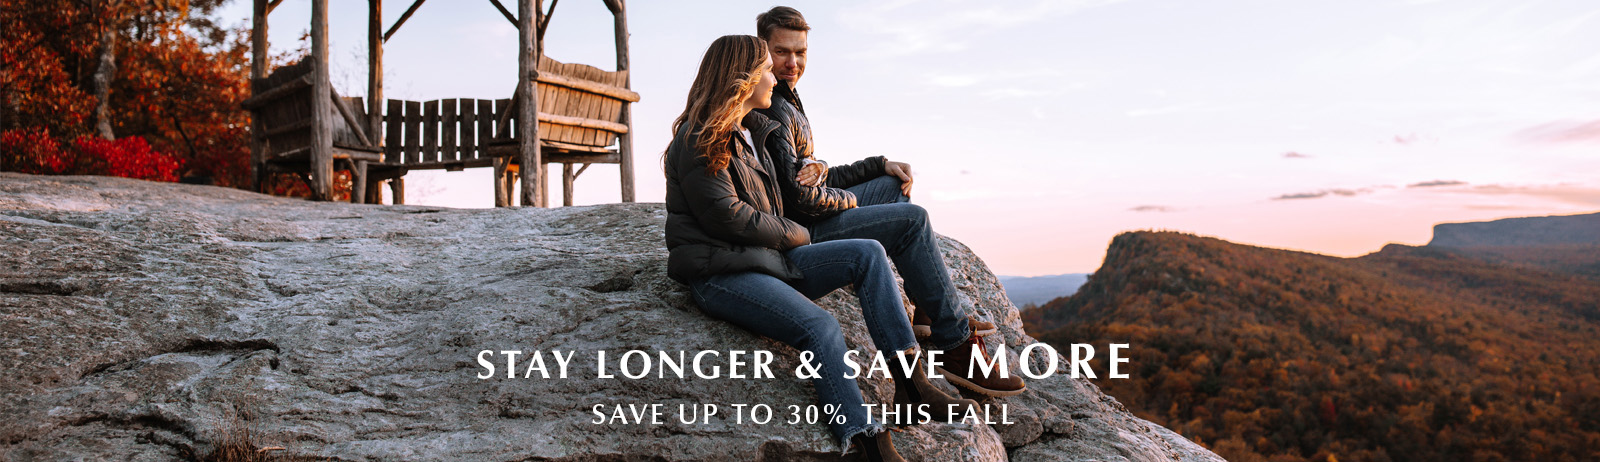 Stay Longer Promotion at Mohonk Mountain House